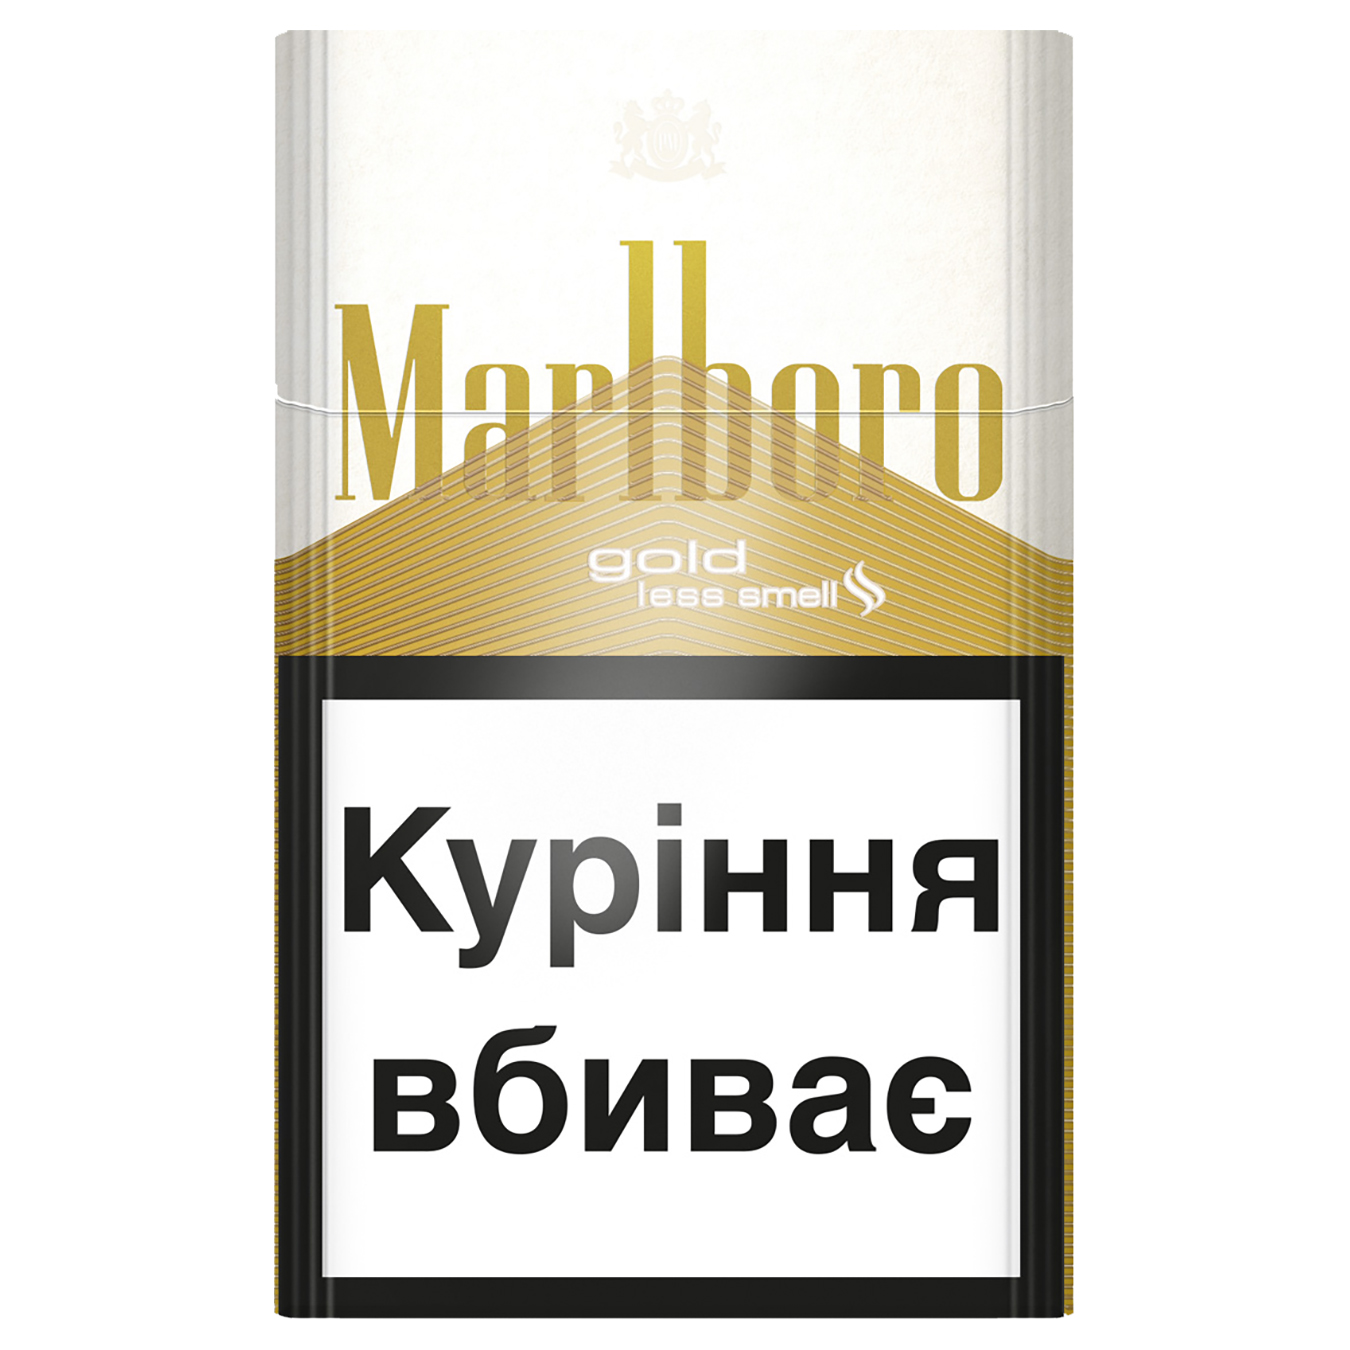 Marlboro Gold Original Cigarettes20 pcs (the price is indicated without excise tax)